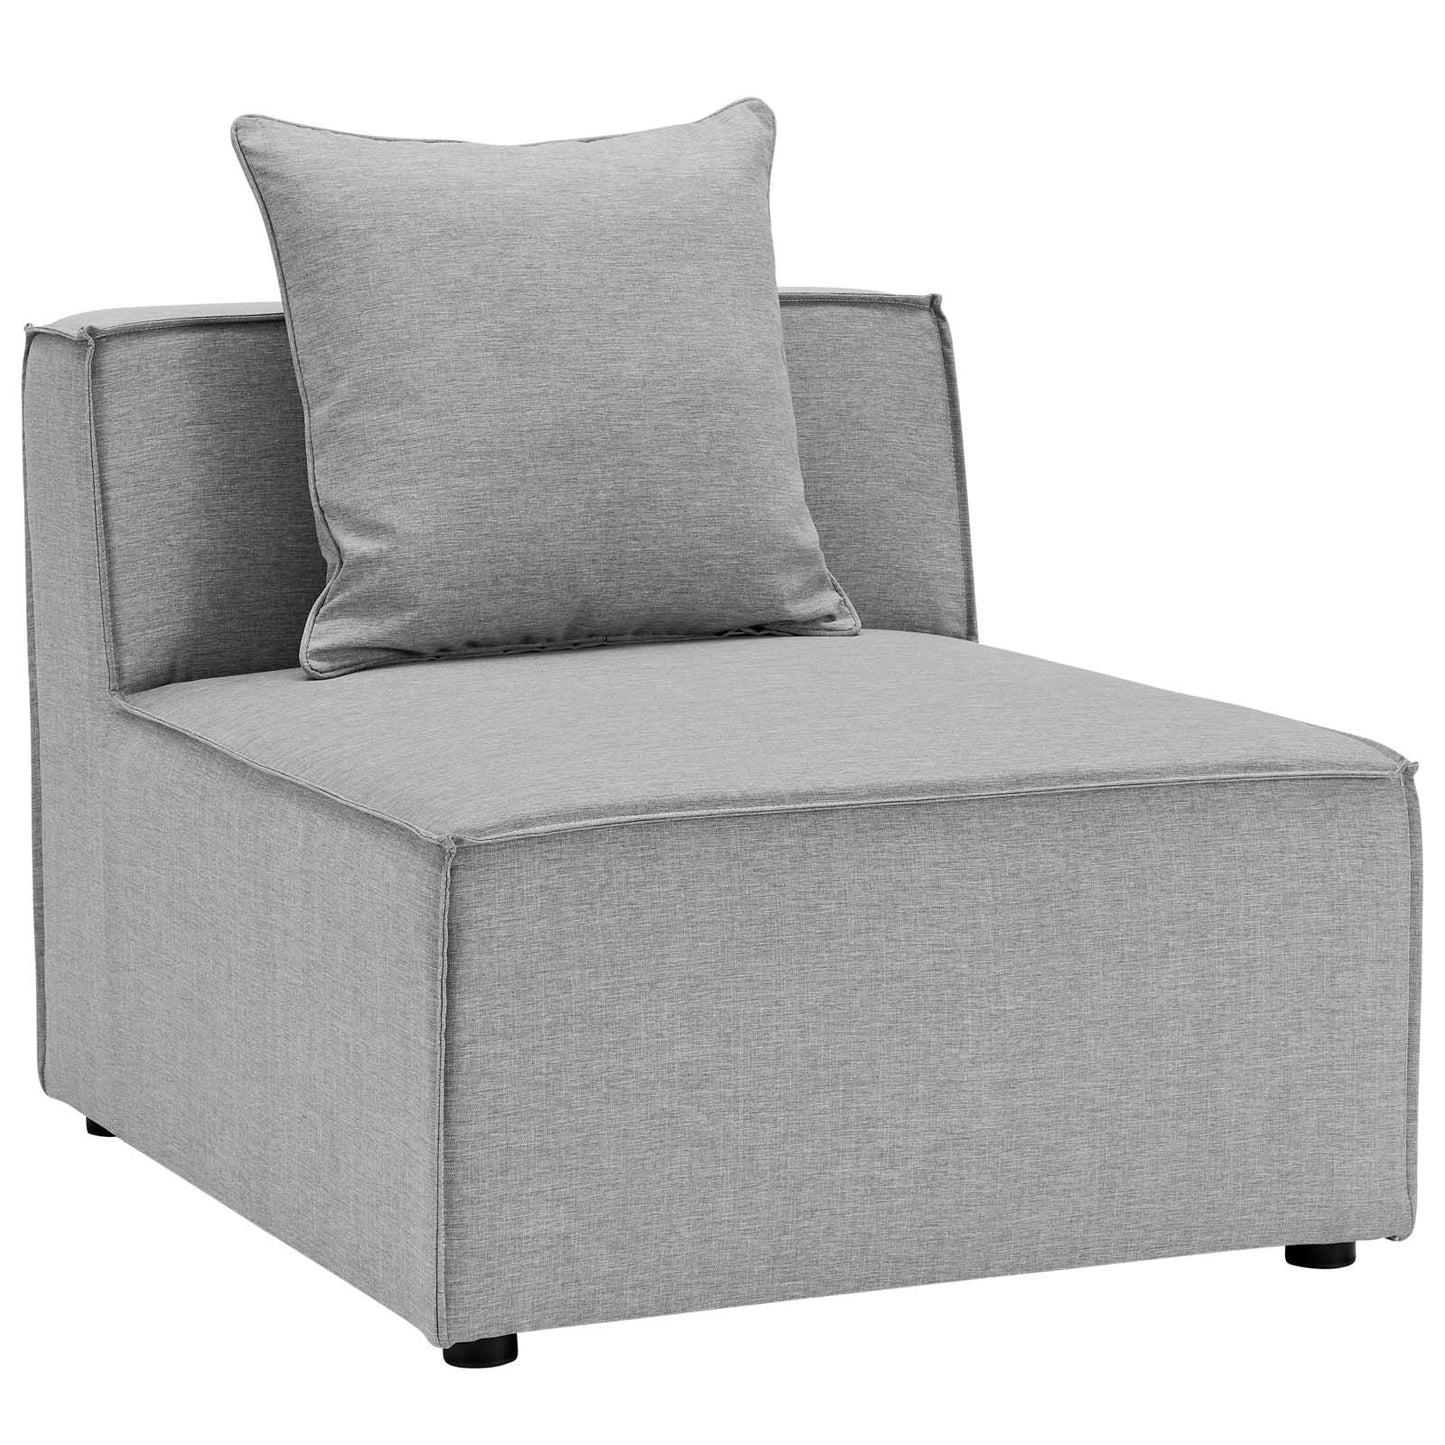 Saybrook Outdoor Patio Upholstered 7-Piece Sectional Sofa Gray EEI-4387-GRY